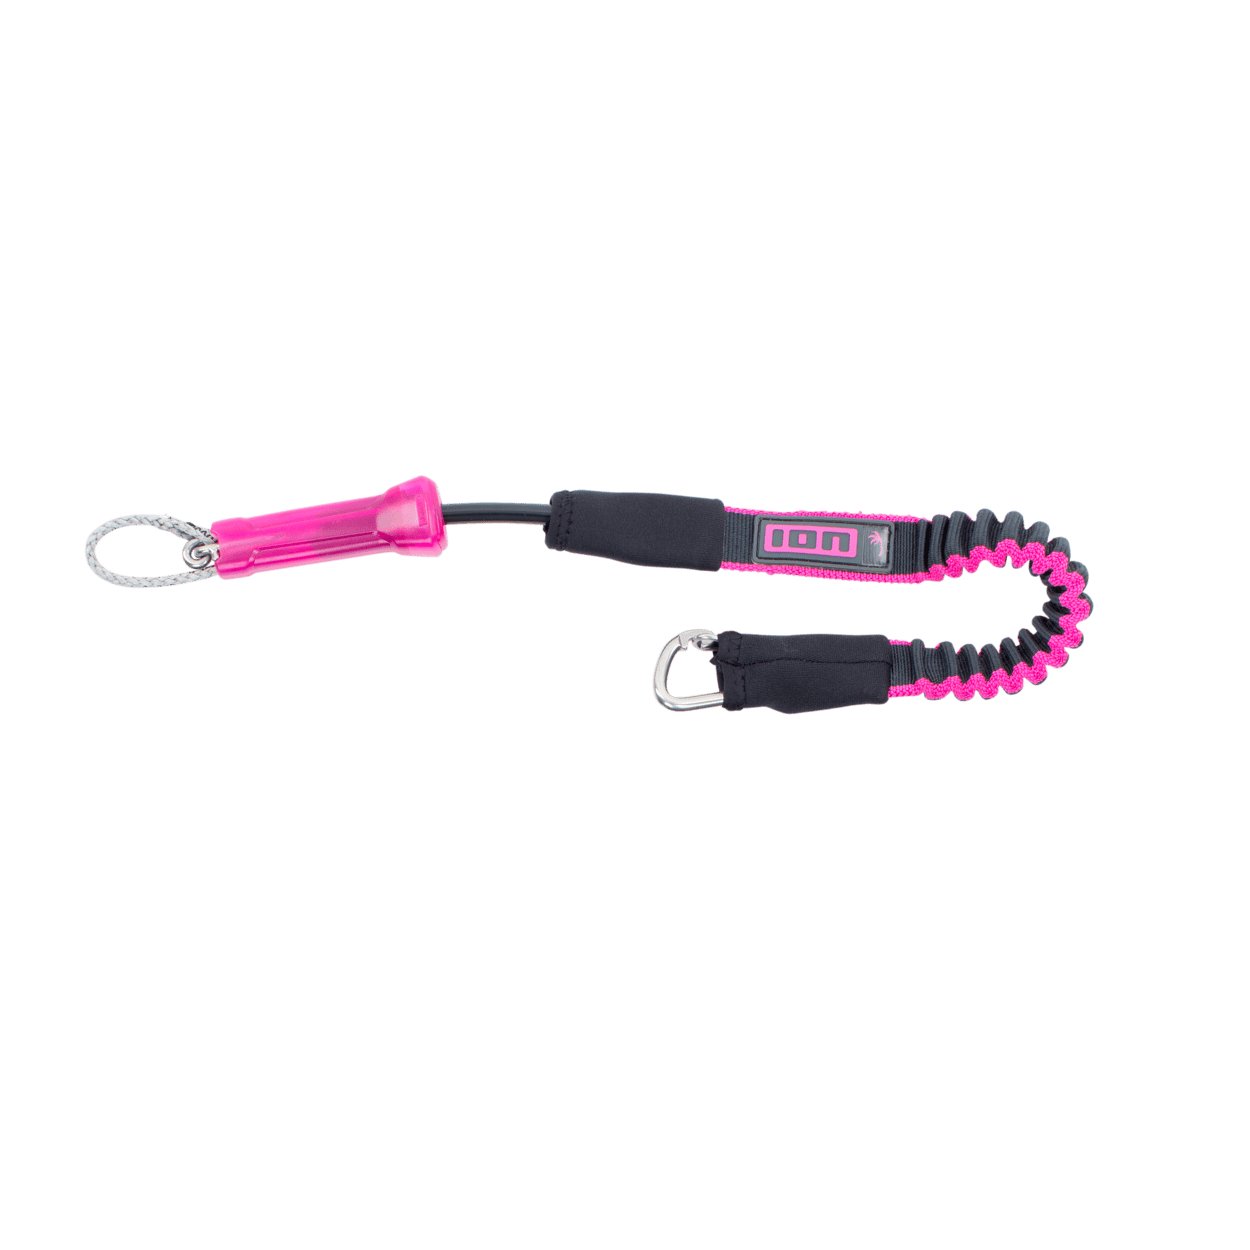 ION Short Leash Webbing 2022 - Worthing Watersports - 9008415960491 - Accessories - ION Water